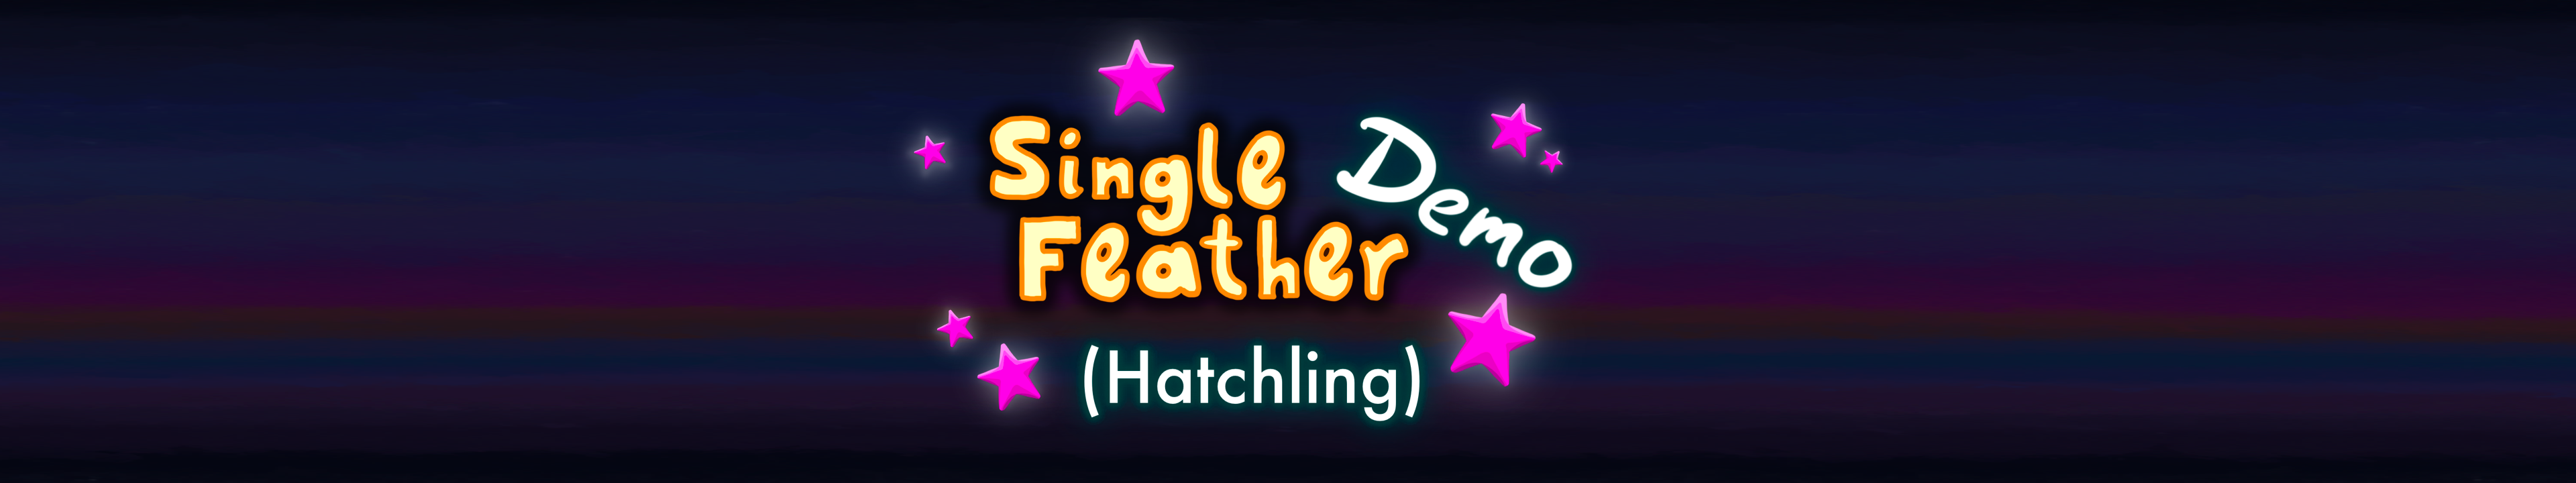 Single Feather Demo (Hatchling)